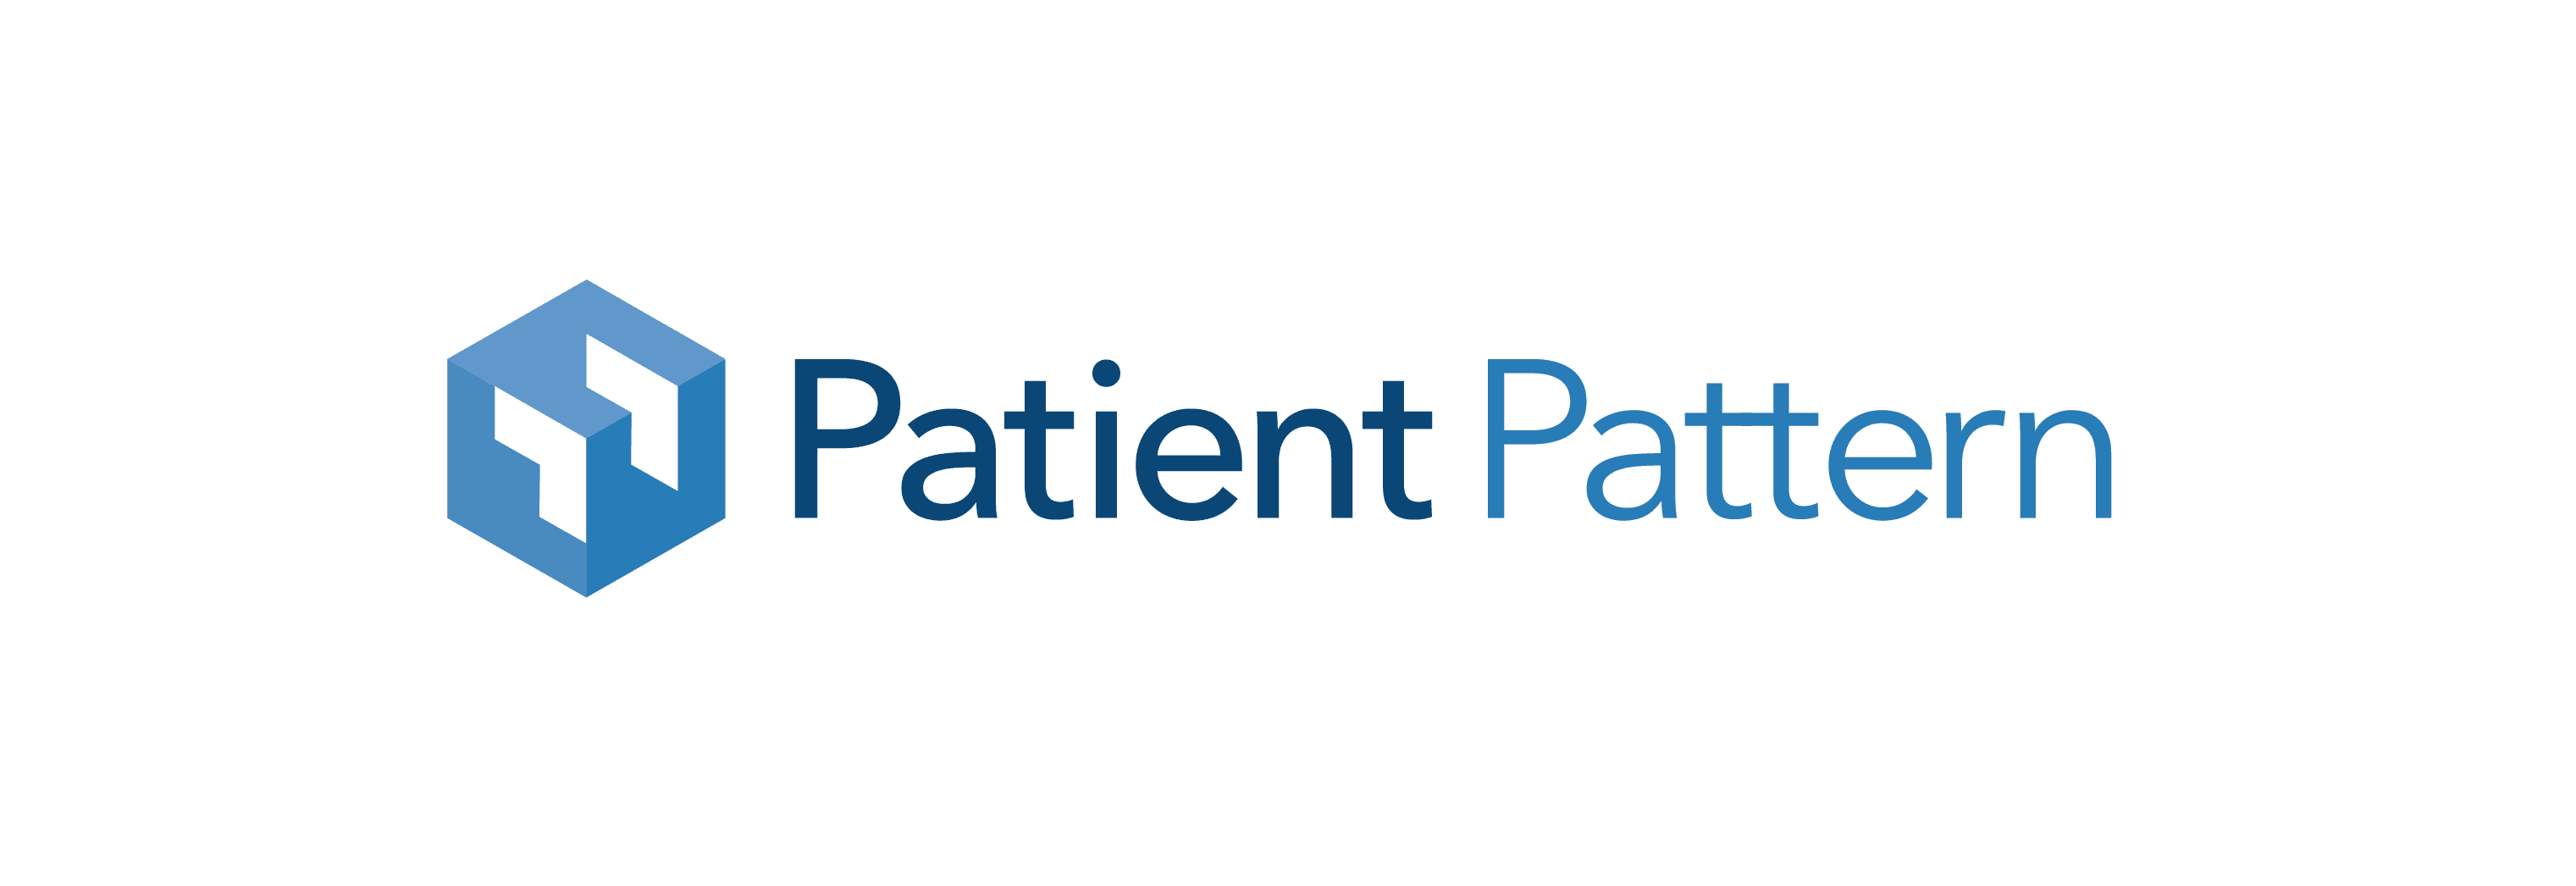 PointClickCare Acquires Value-Based Care EHR Patient Pattern